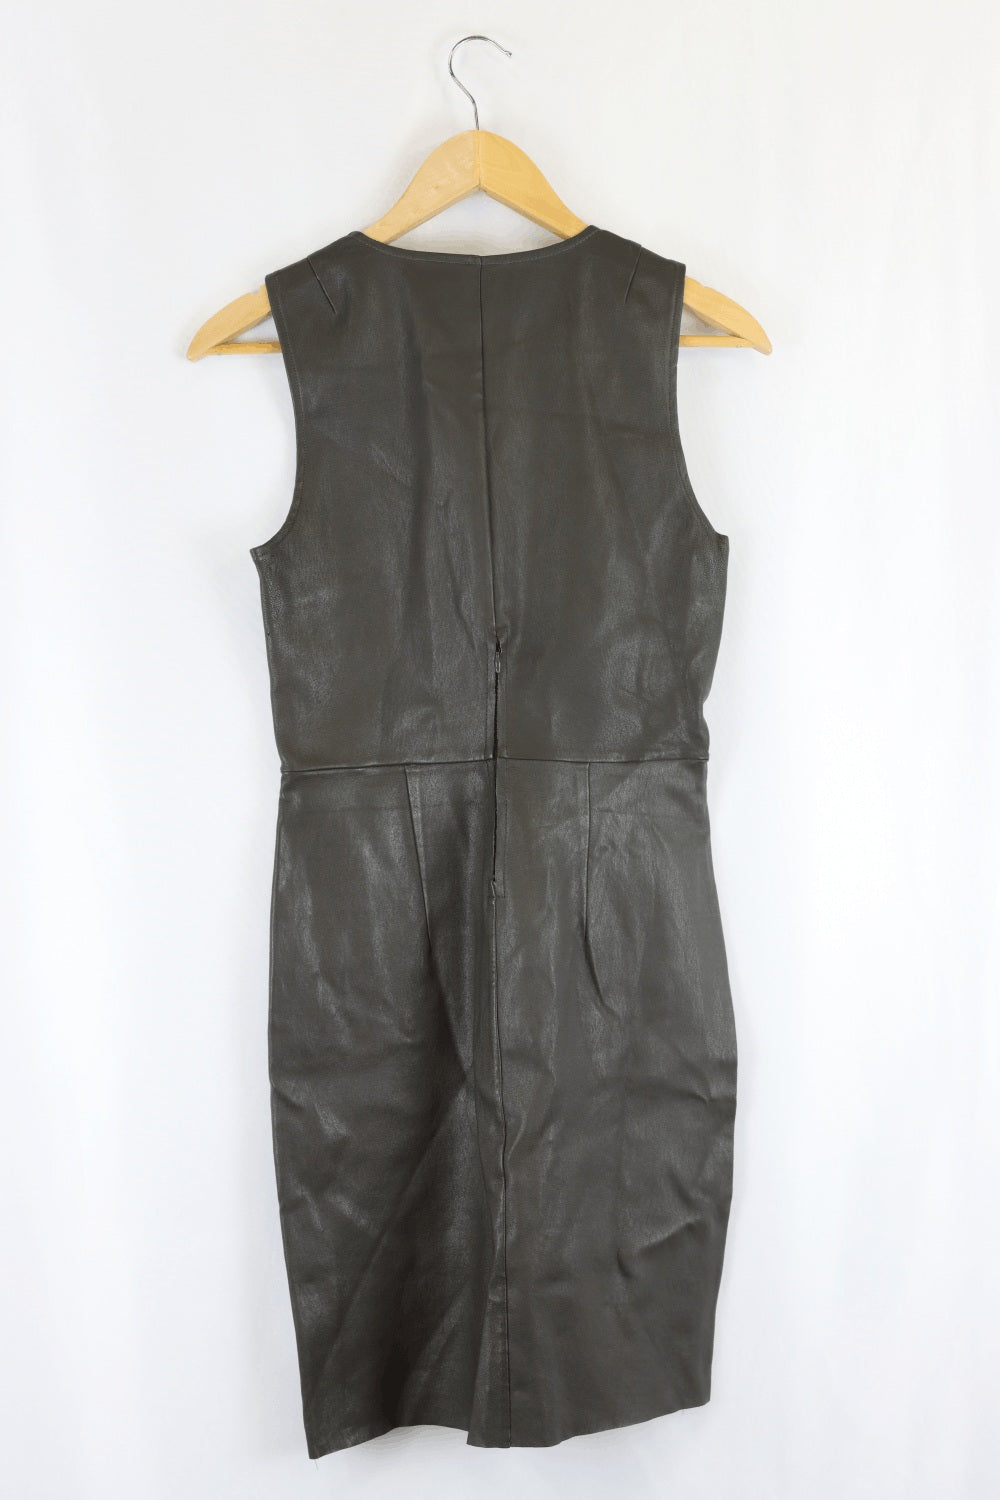 Scanlan Theodore Leather Brown Dress S